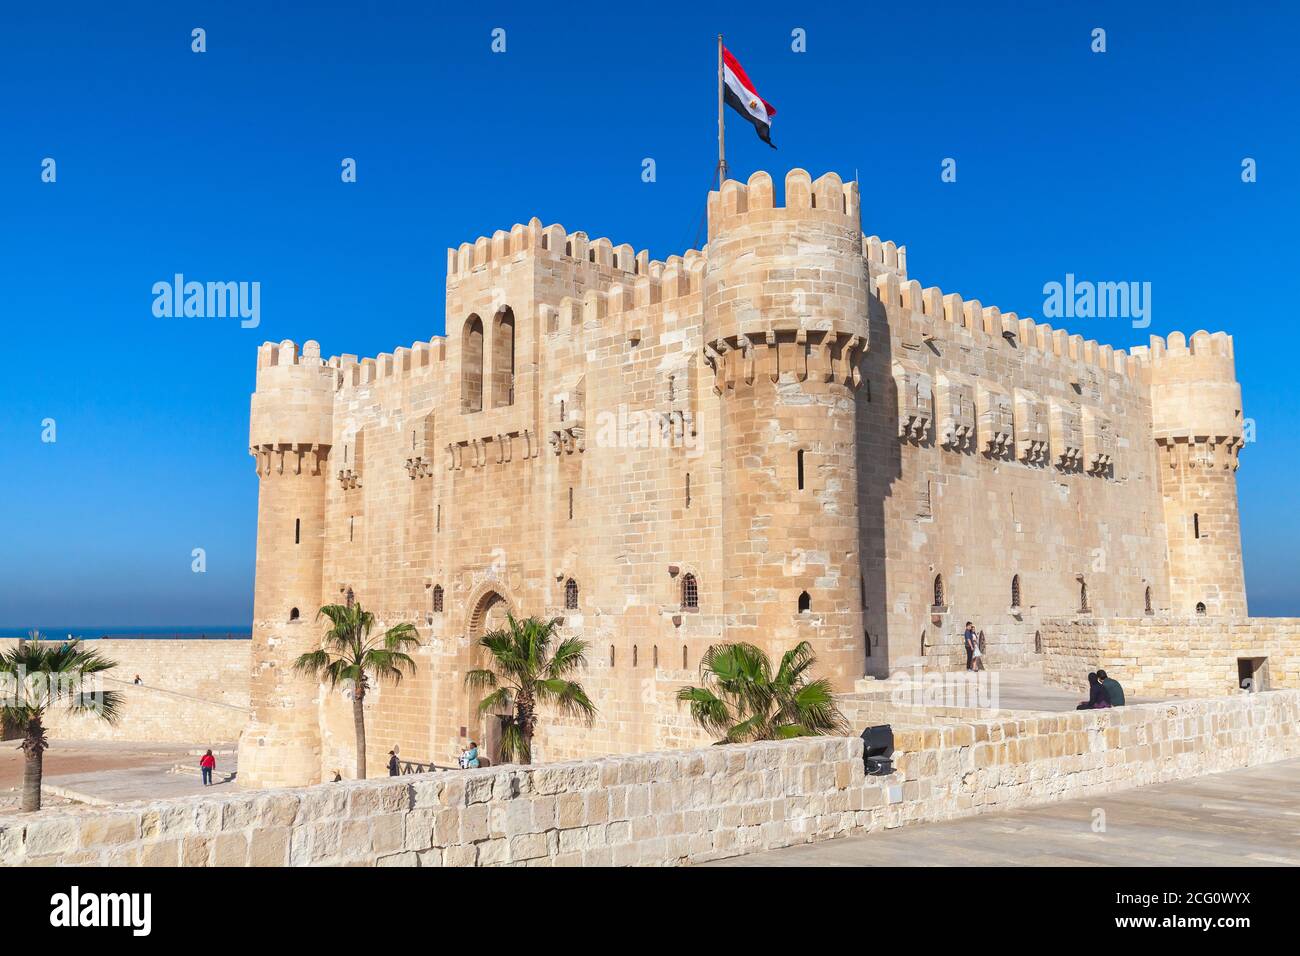 Alexandria, Egypt - December 14, 2018: The Citadel of Qaitbay or the Fort of Qaitbay is a 15th-century defensive fortress located on the Mediterranean Stock Photo